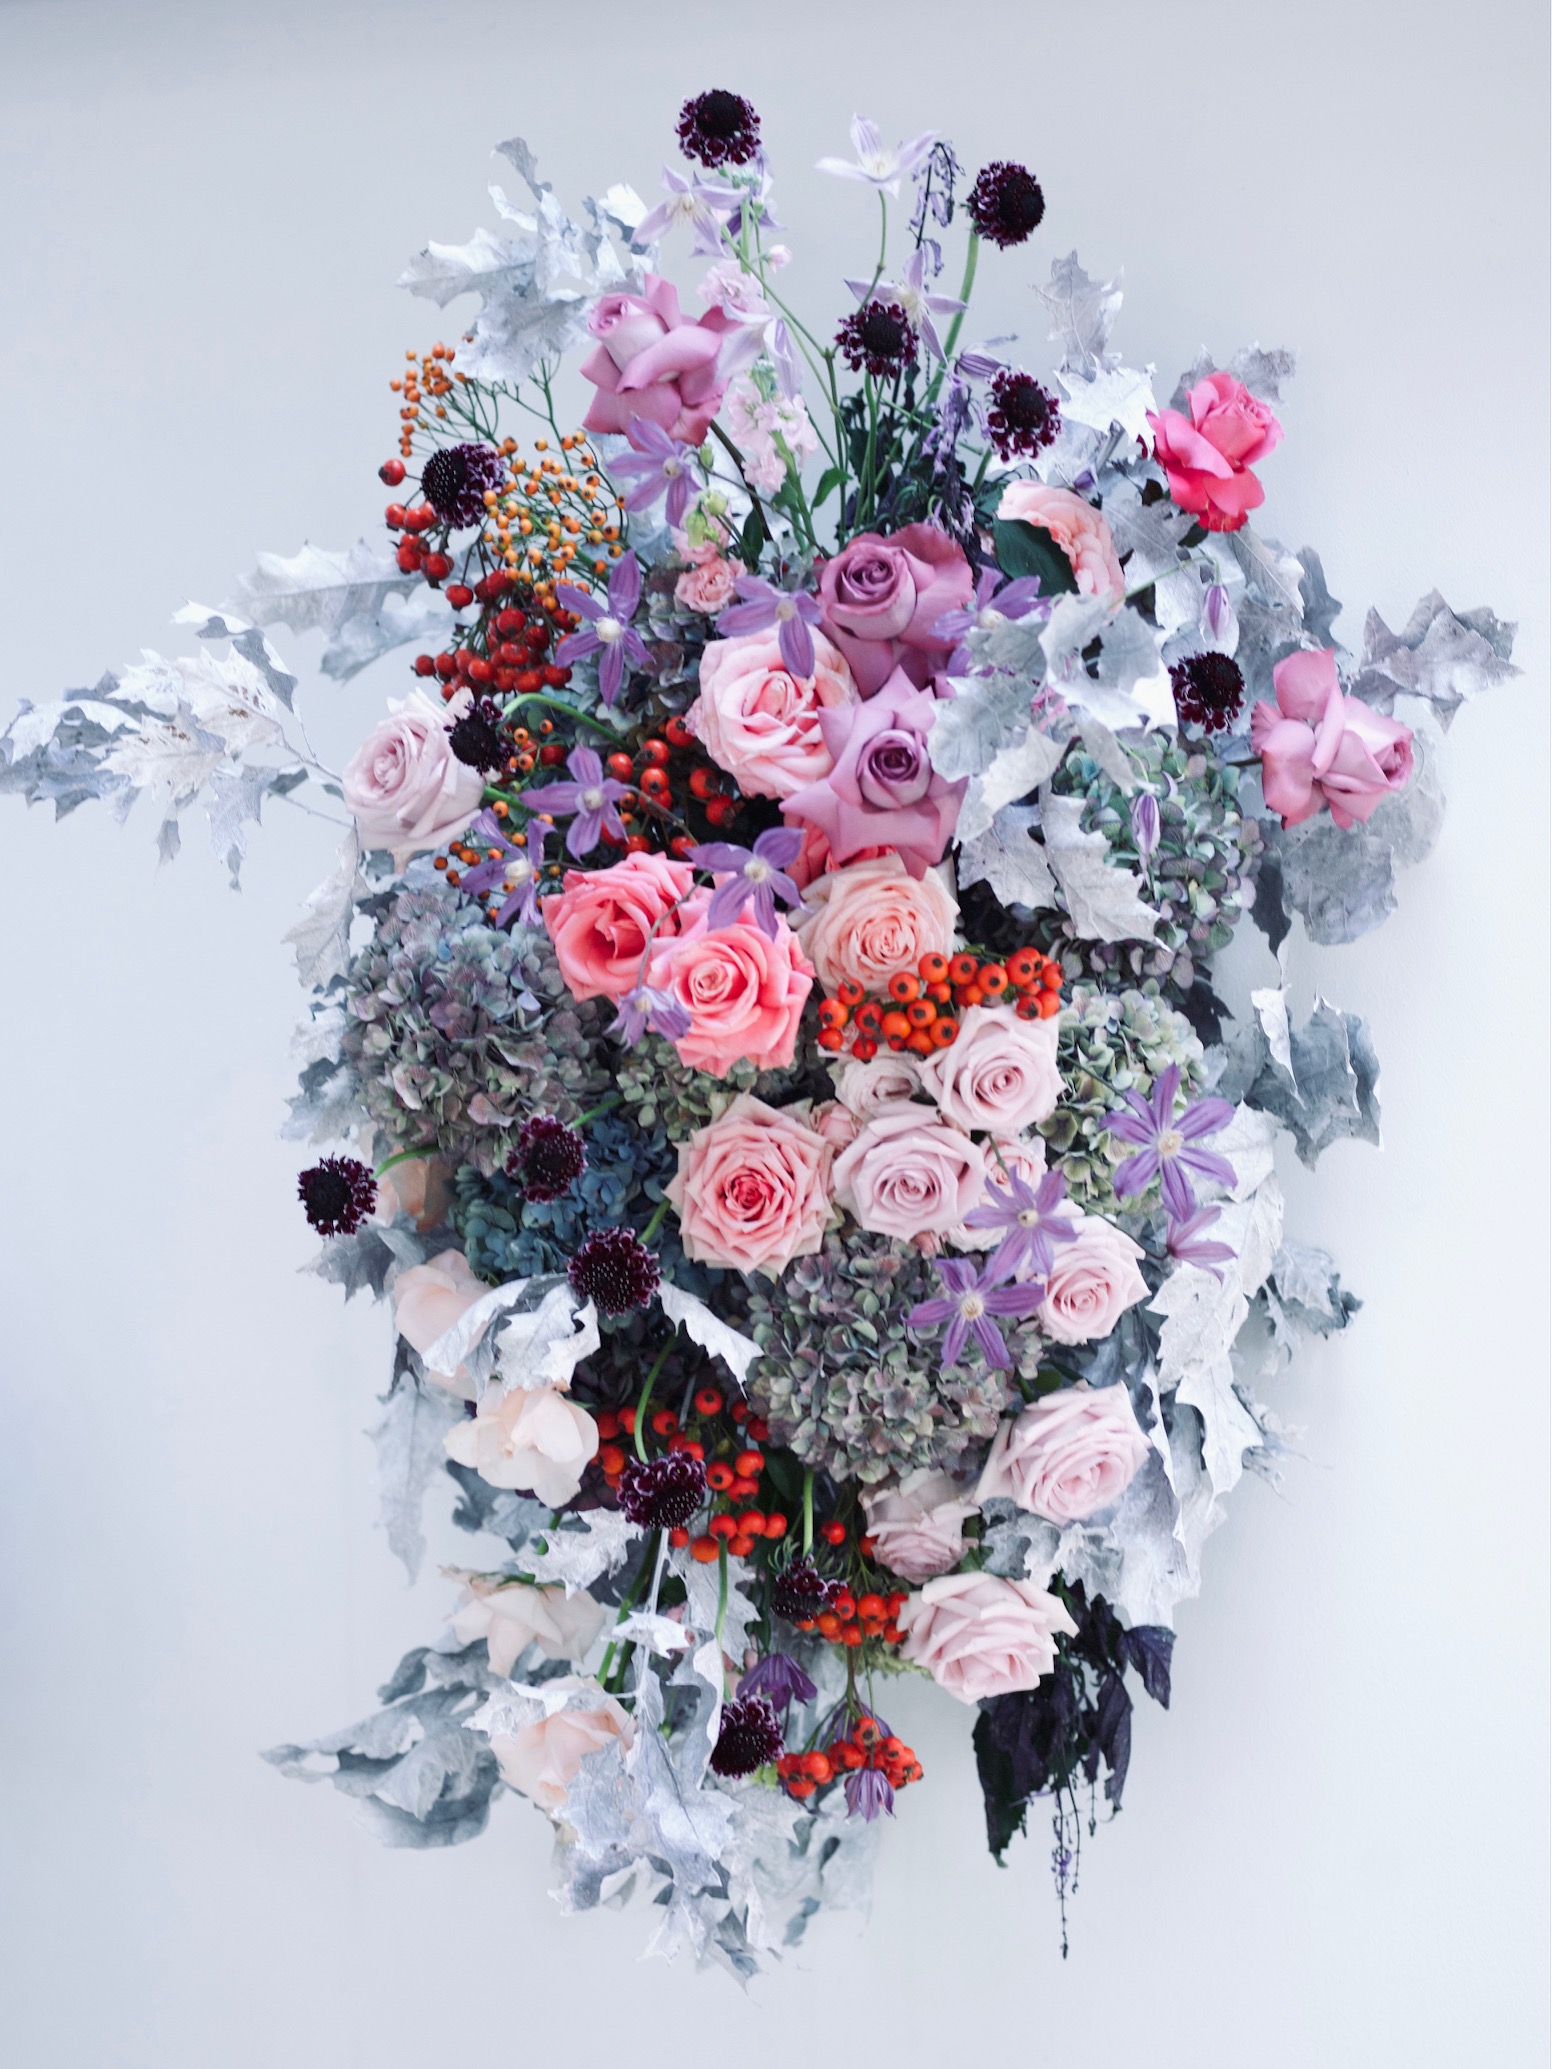 Wall arrangement with De Ruiter Roses by Katya Hutter